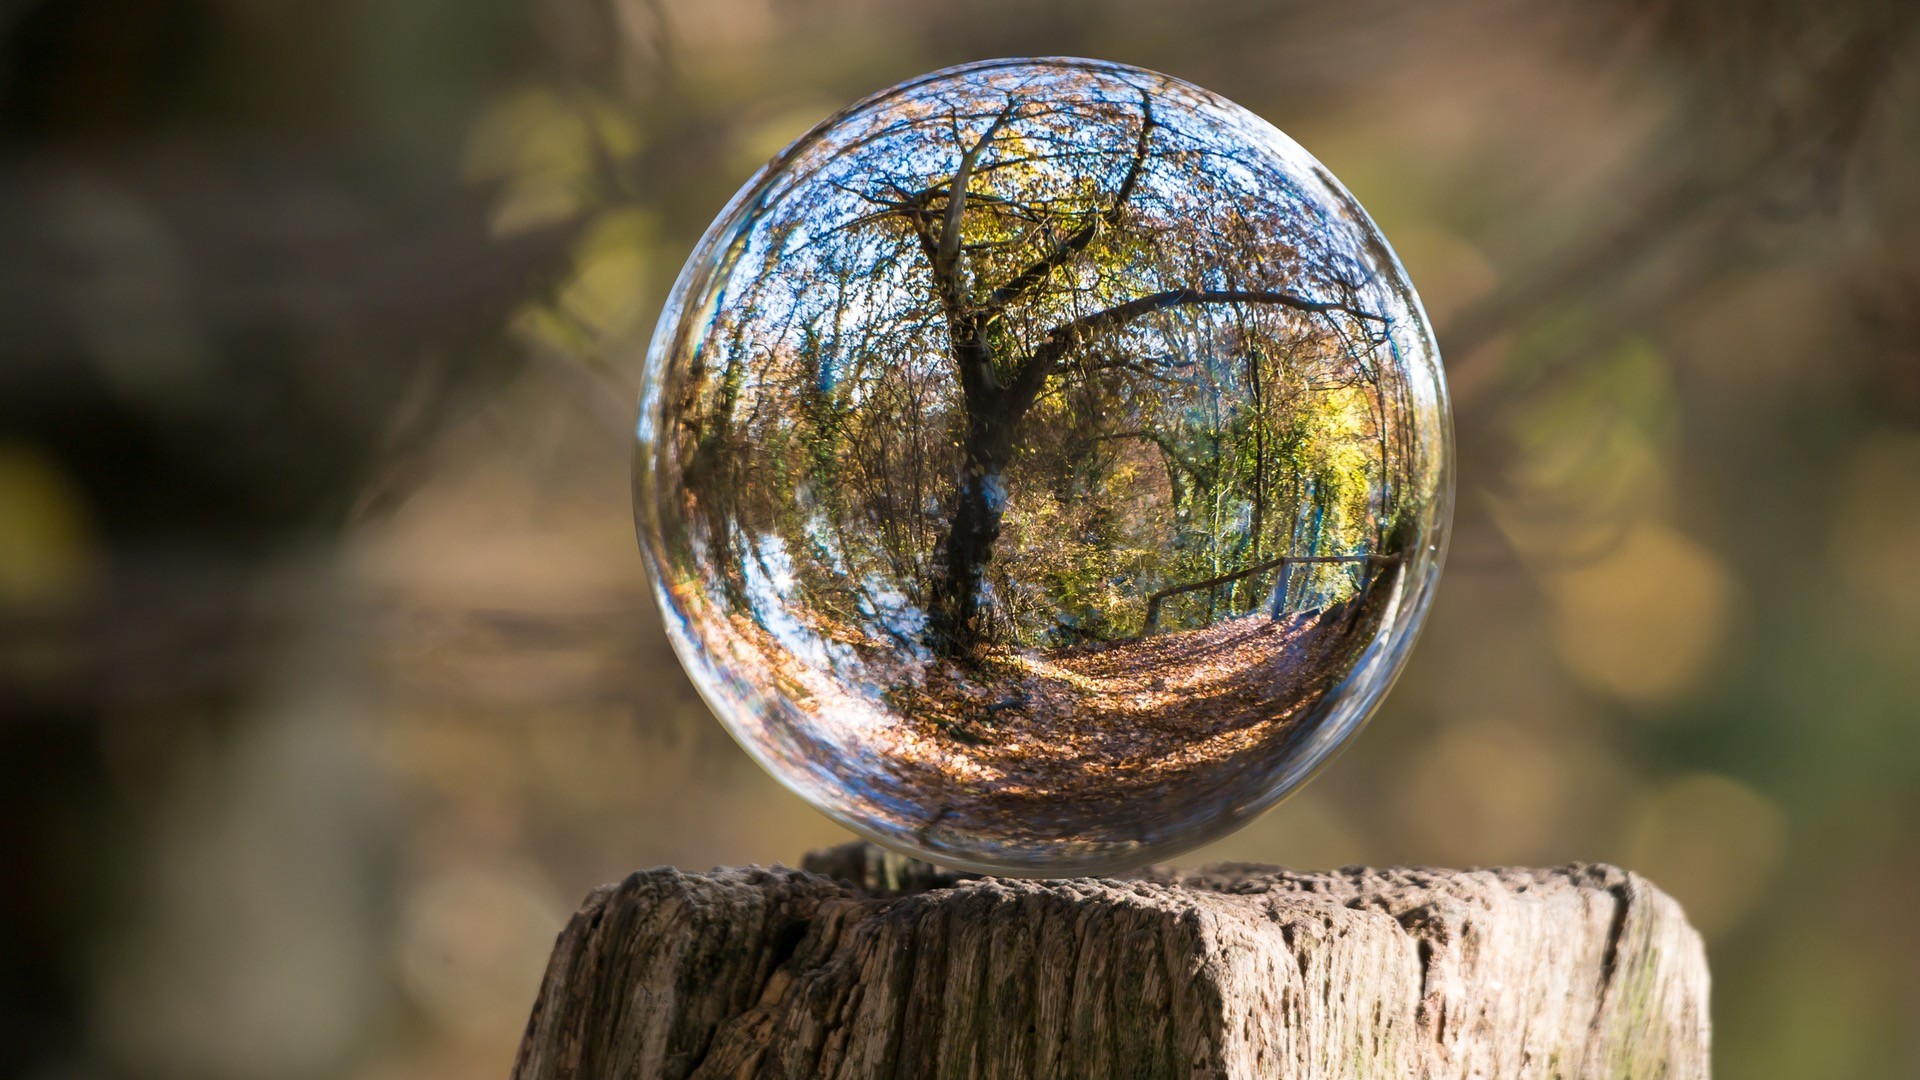 Nature Landscape Trunks Wood Sphere Glass Reflection Trees Fall Leaves Depth Of Field Distortion 1920x1080